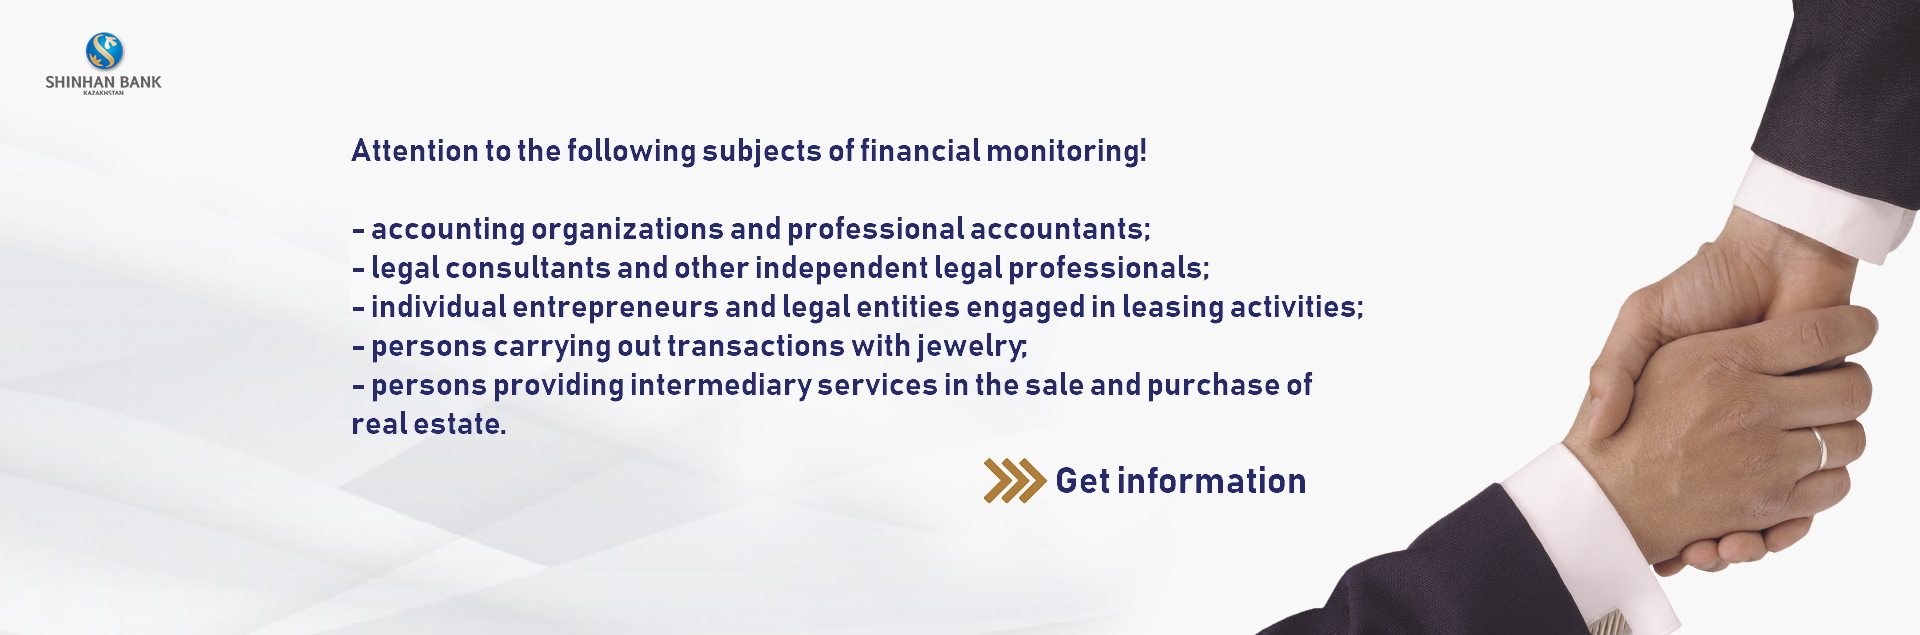 Attention to the subjects of financial monitoring!